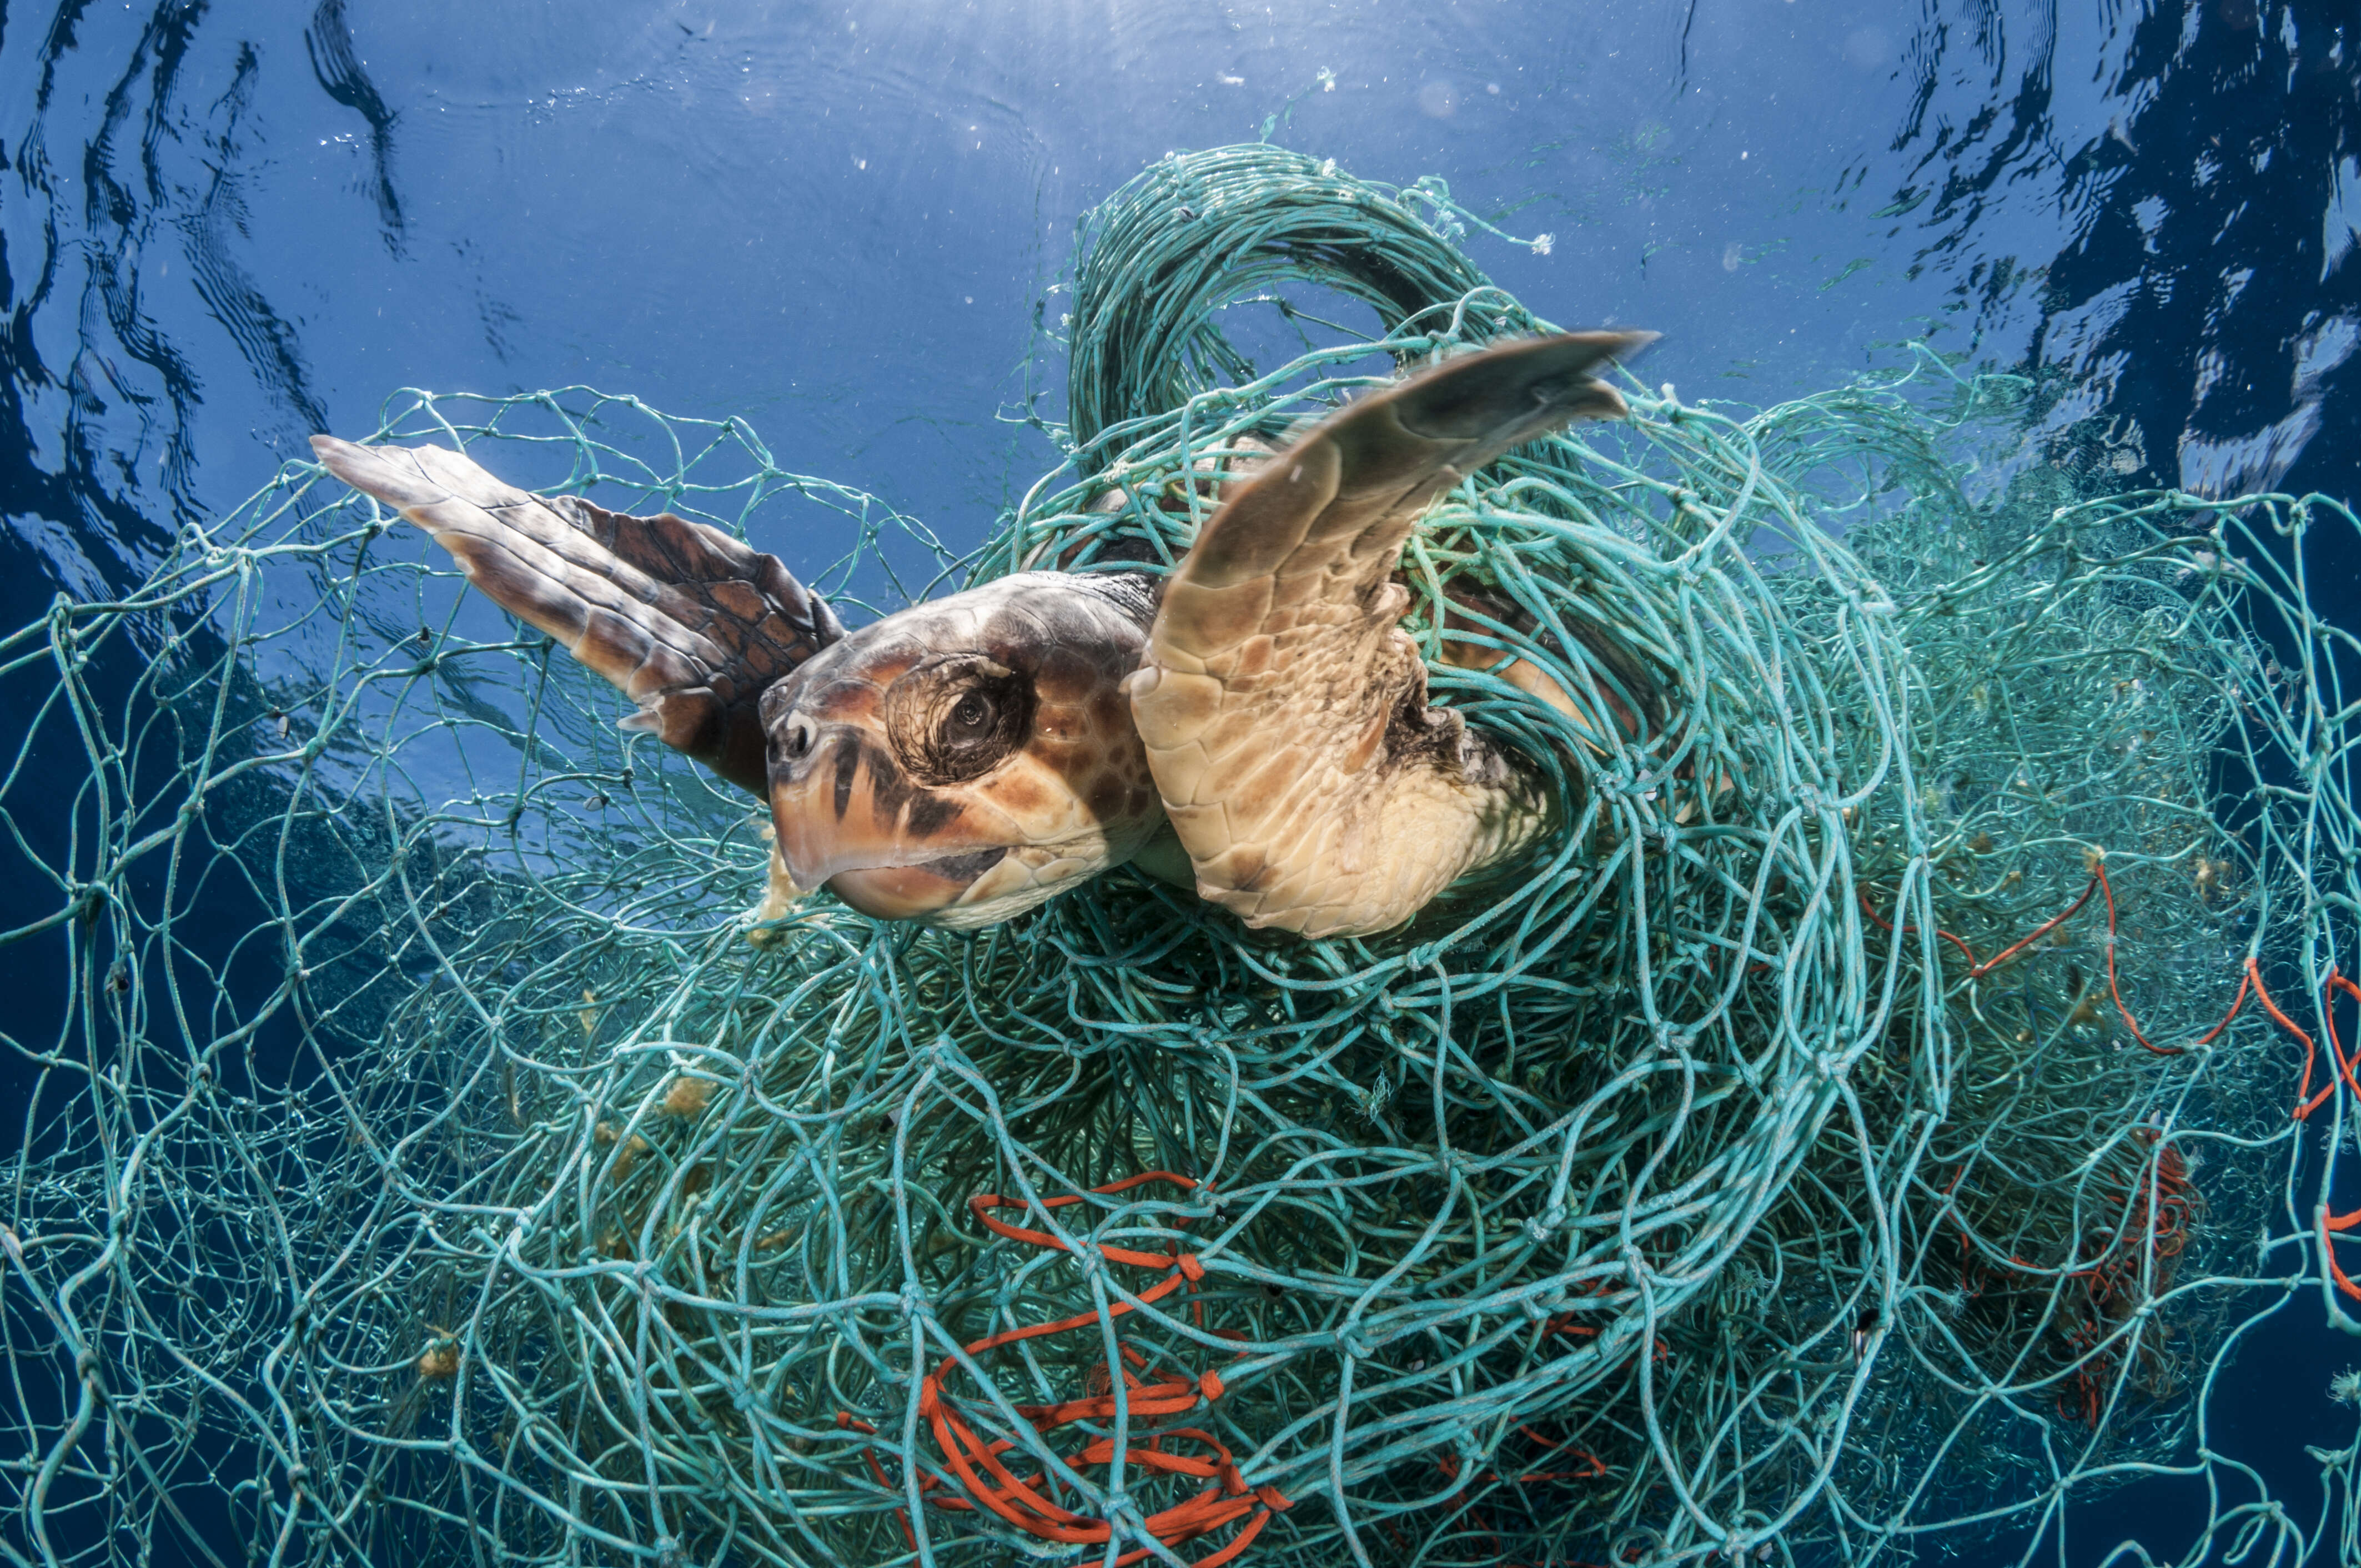 Turtle caught in a ghost net